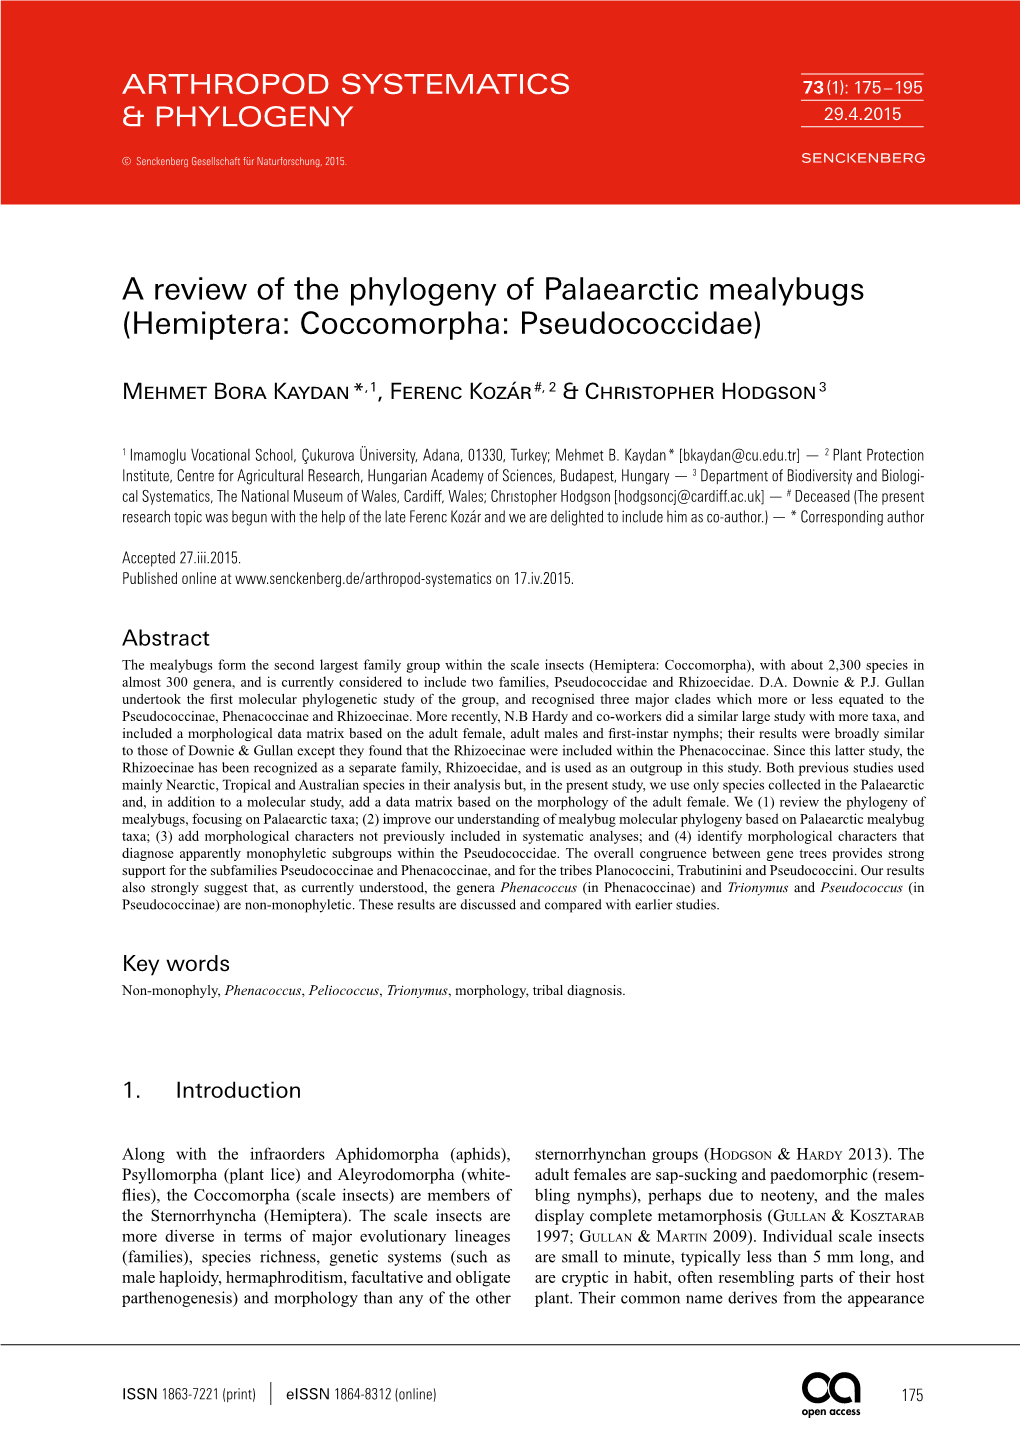 A Review of the Phylogeny of Palaearctic Mealybugs (Hemiptera: Coccomorpha: Pseudococcidae)